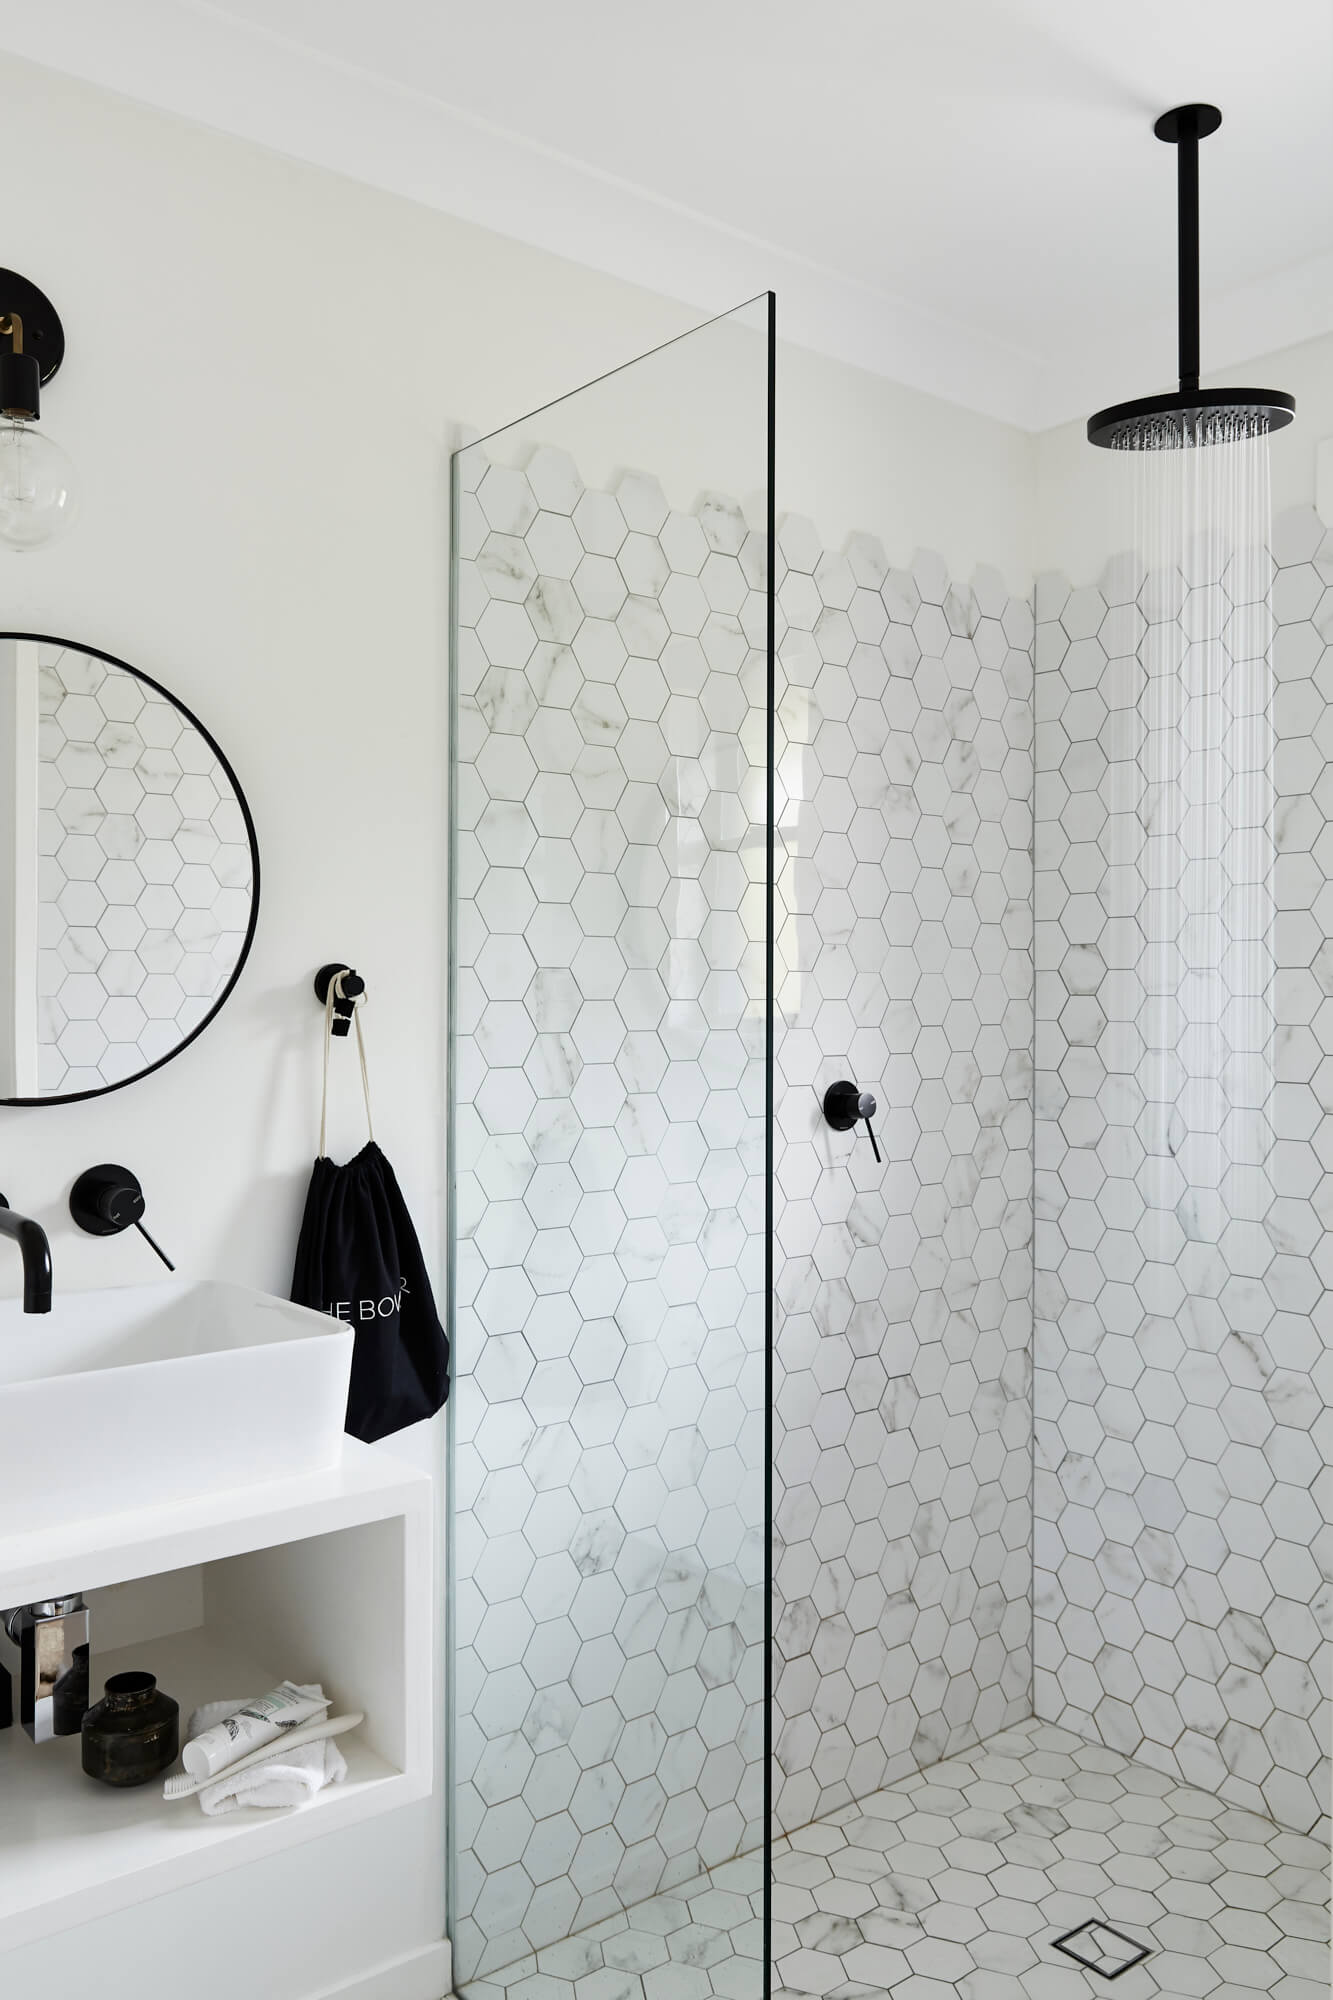 Ensuite at Bower House, The Bower Byron Bay featuring hexagonal tiles in the shower and a round mirror above vanity